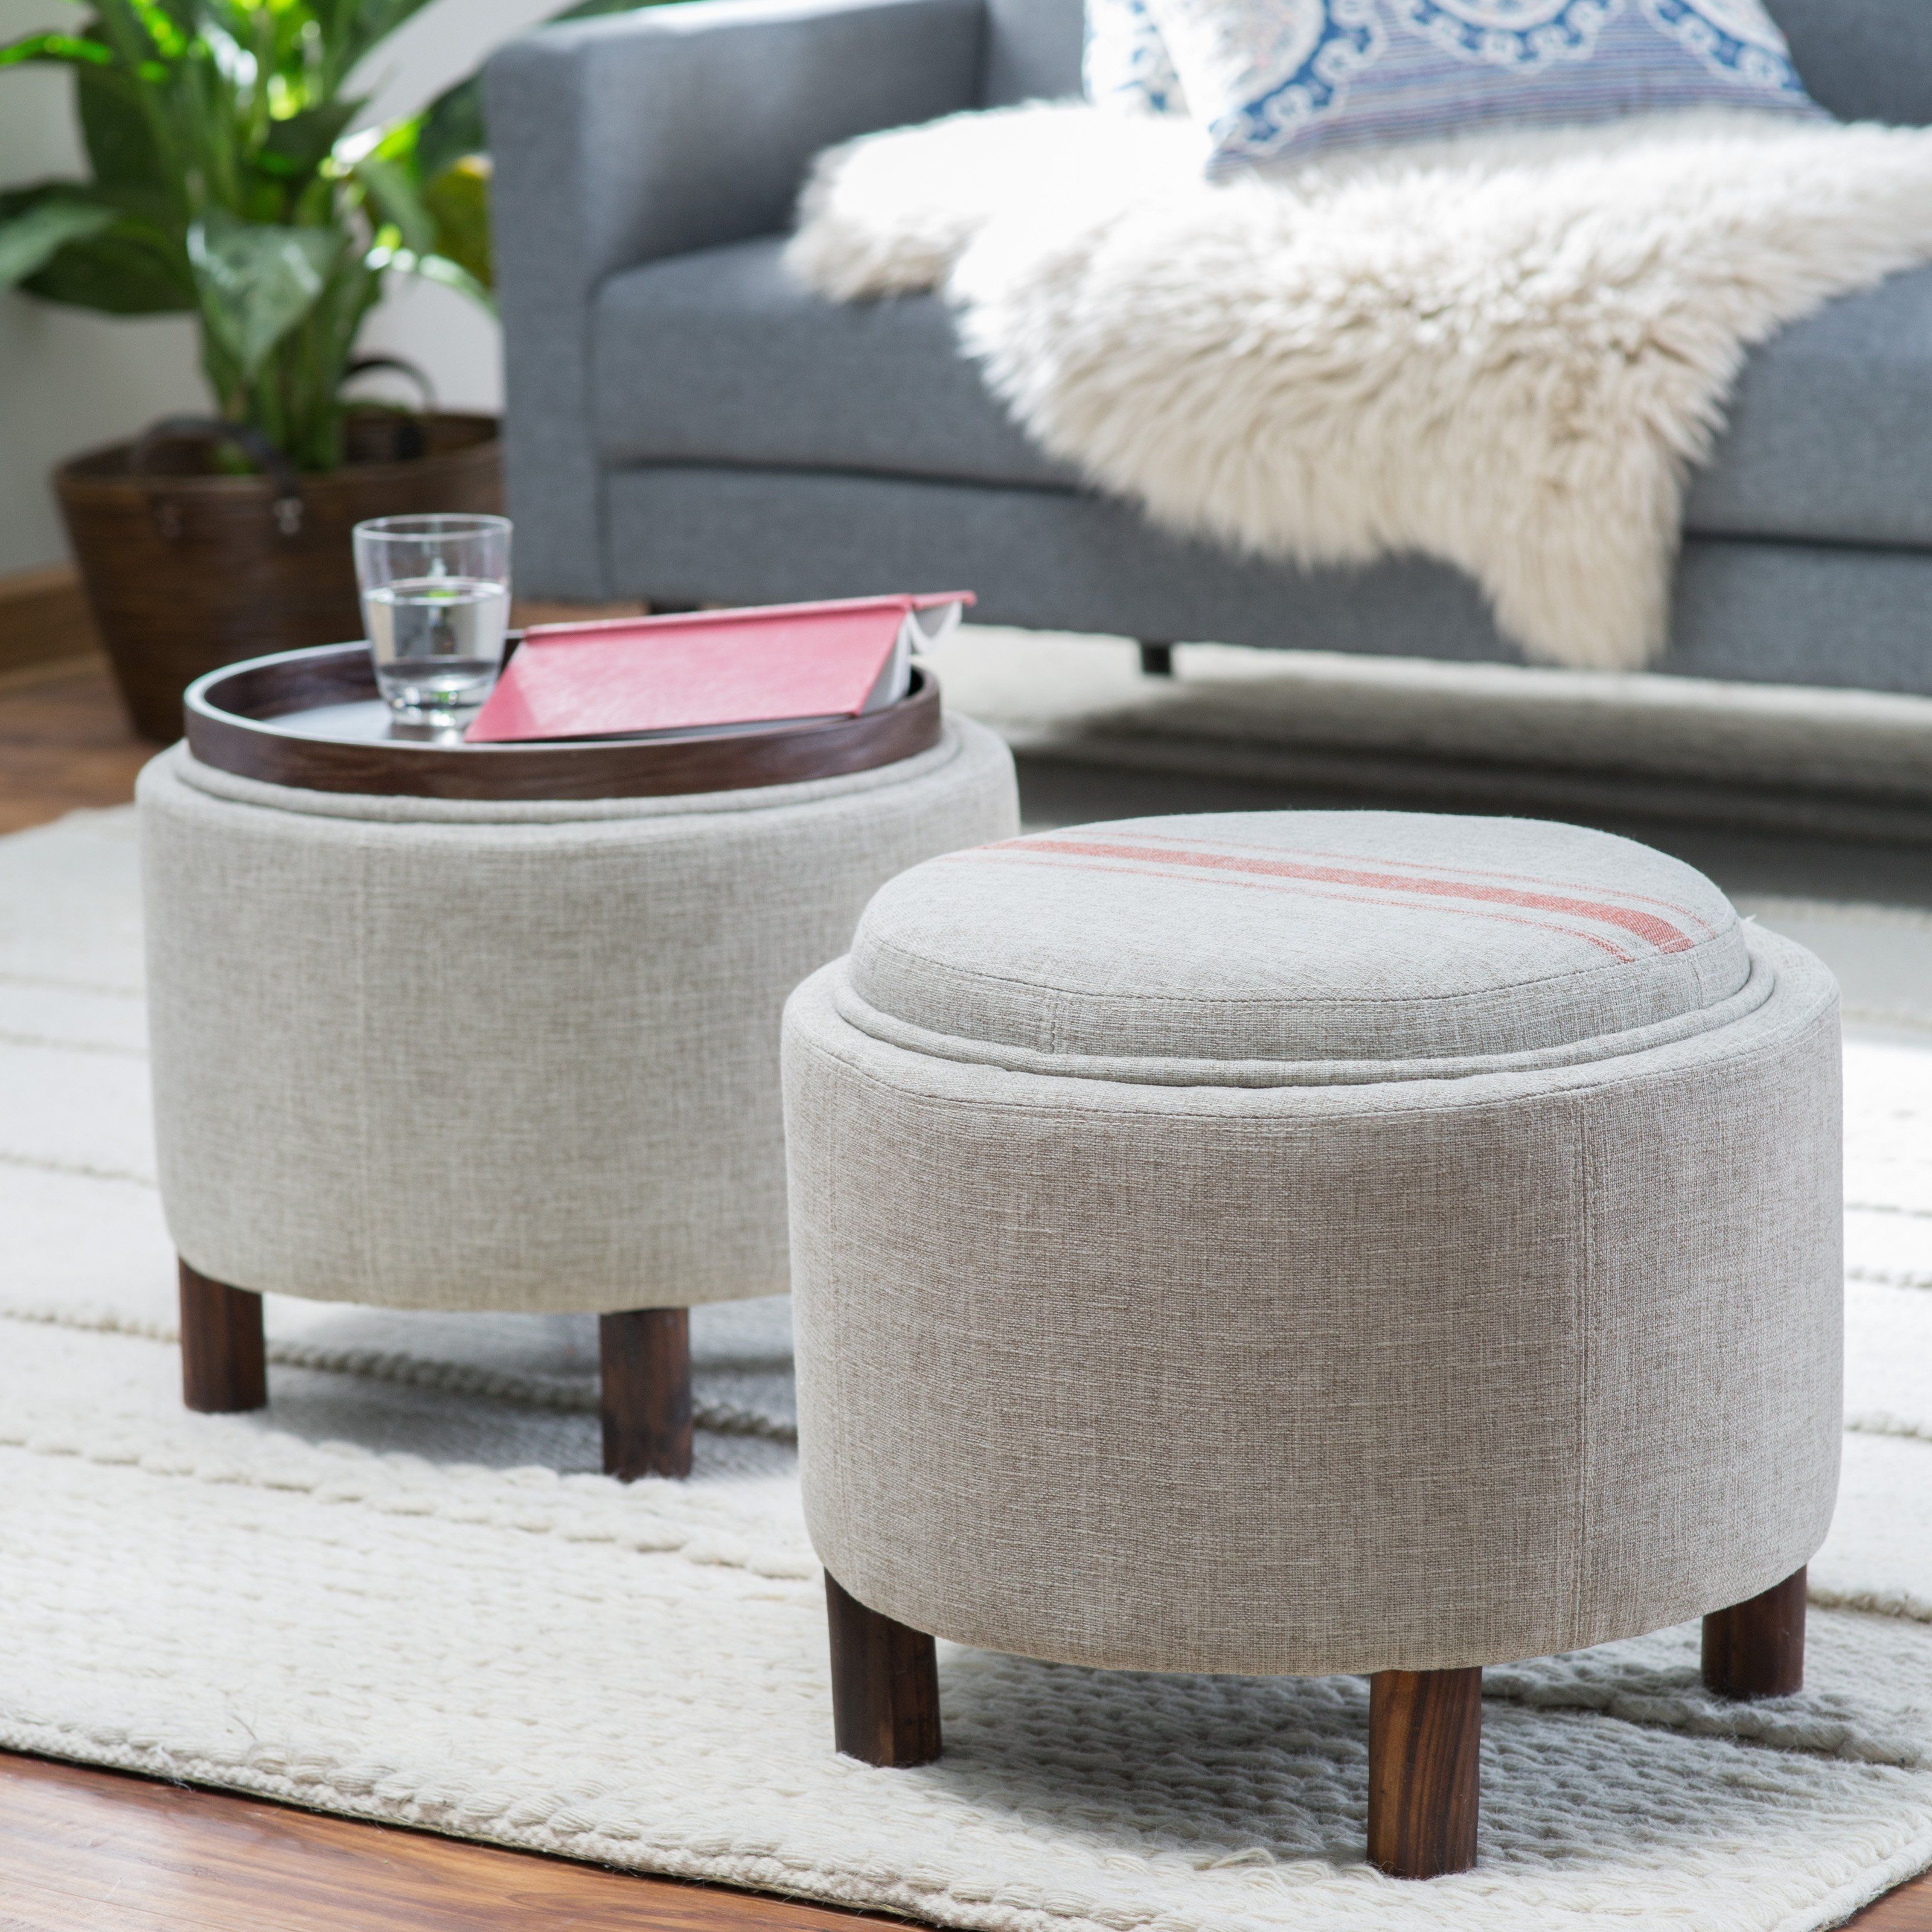 Belham Living Ingram Round Storage Ottoman With Cocktail Tray – Tb With Regard To Ottomans With Tray (Photo 1 of 15)